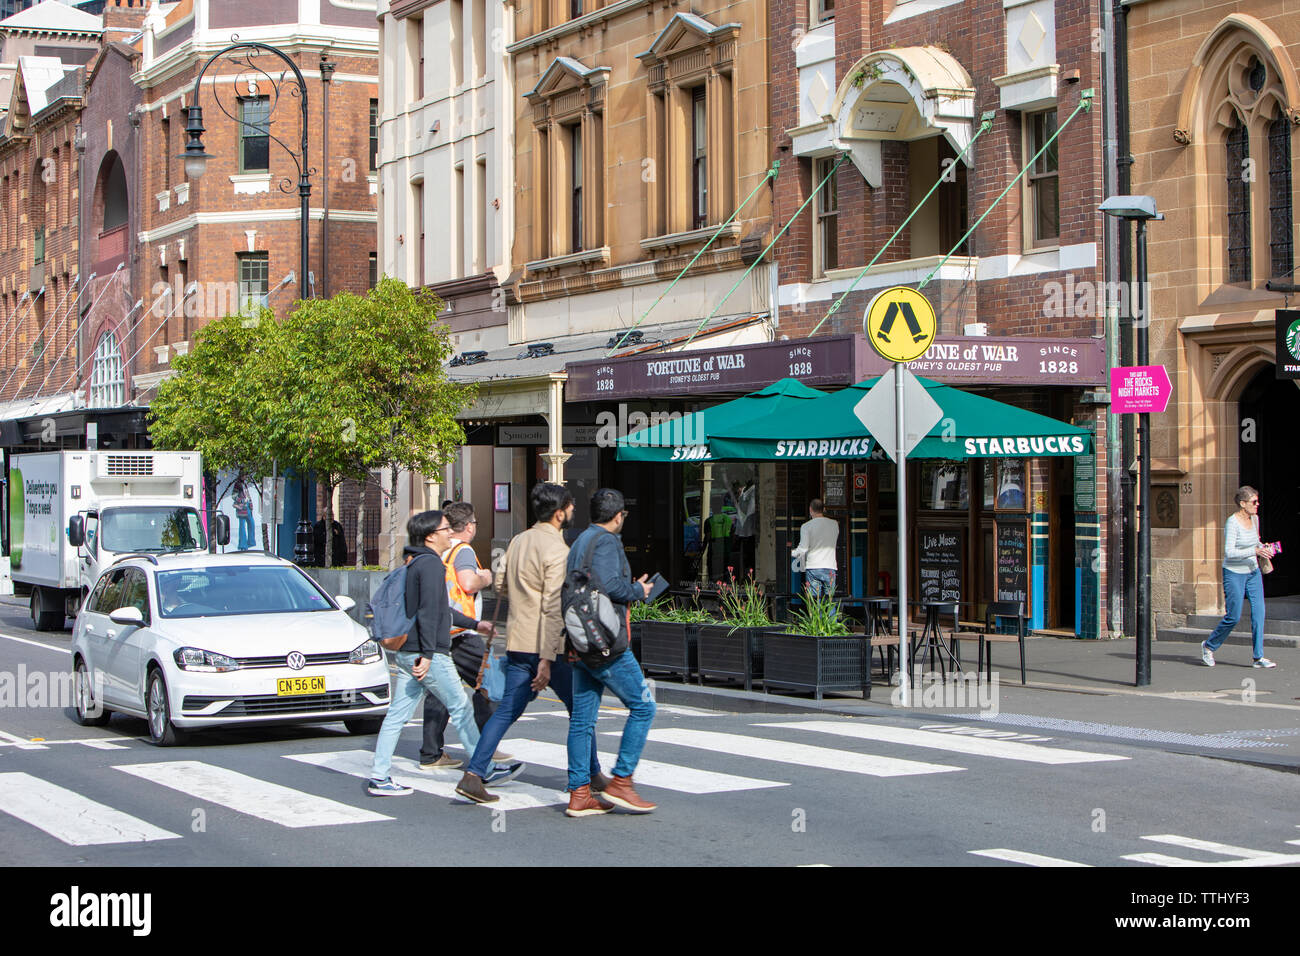 Men crossing the road in the Rocks area of Sydney beside Fortune of war sydney's oldest pub and starbucks cafe,Sydney,Australia Stock Photo